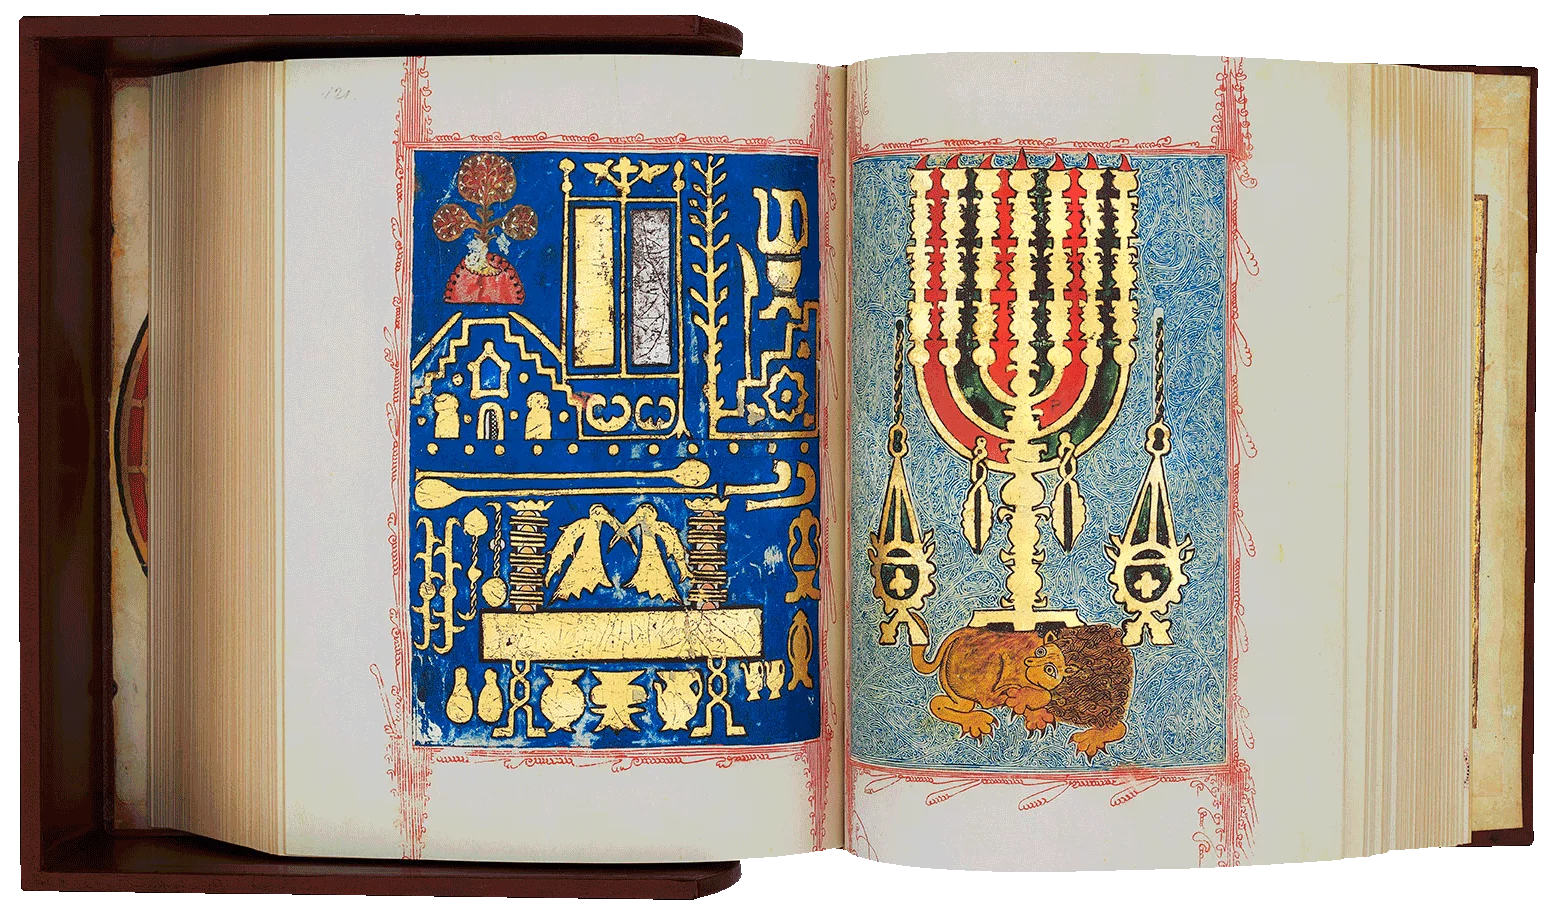 Folio 120/121 The famous carpet pages, traditional in Sephardic bibles, depict the implements used in the Temple, the Mount of Olives, the table of Shewbread and the menorah guarded by the Lion of Judah.<br /><a href="https://facsimile-editions.com/product/kennicott-120/"> Click to PURCHASE <u>just</u> this leaf </a><small><a href="https://www.facsimile-editions.com/copyright/">© Copyright 2021 Facsimile Editions Ltd</a></small>